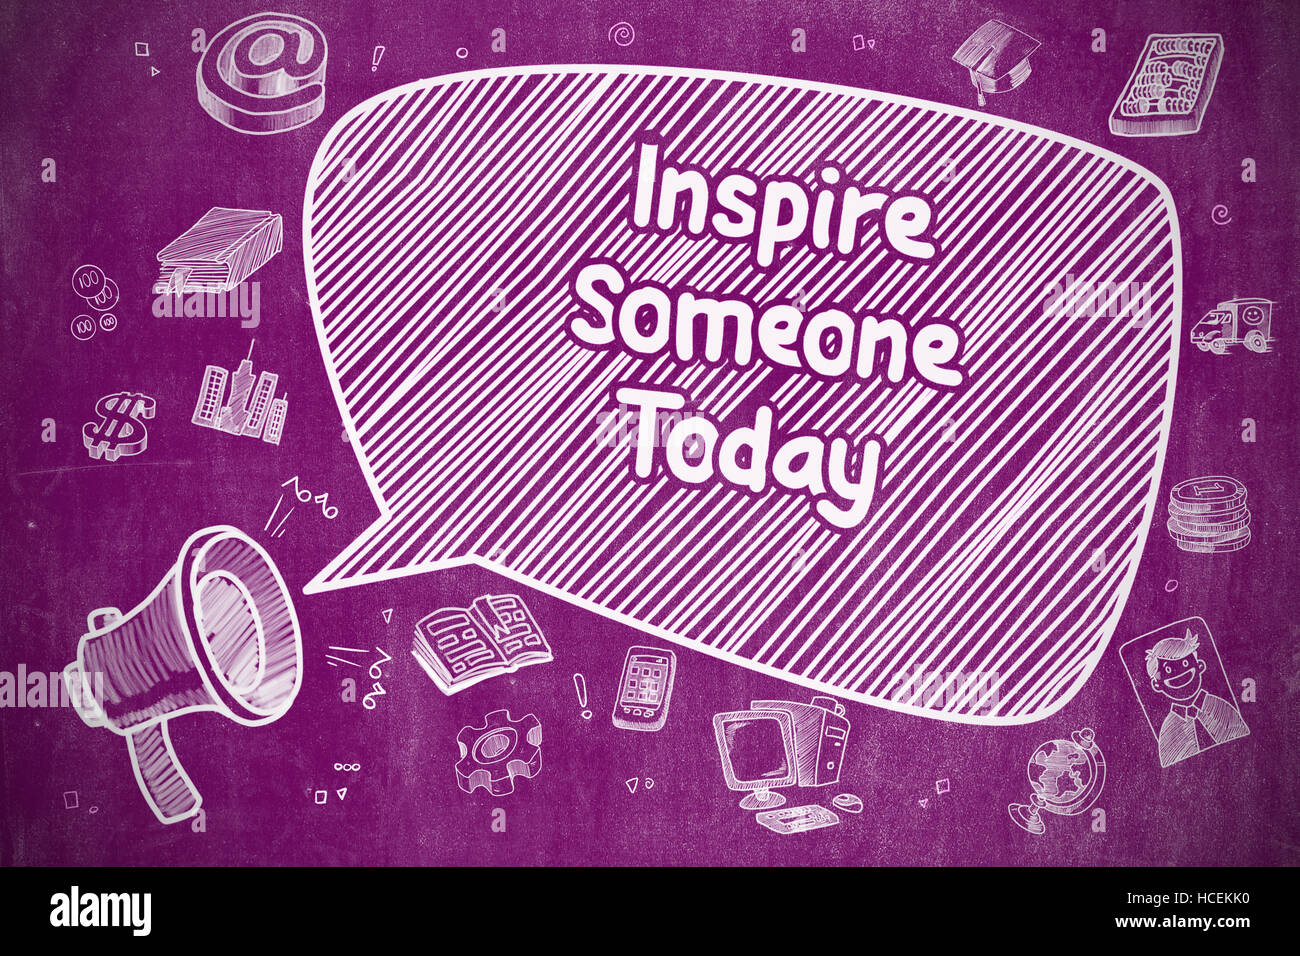 Inspire Someone Today - Business Concept. Stock Photo